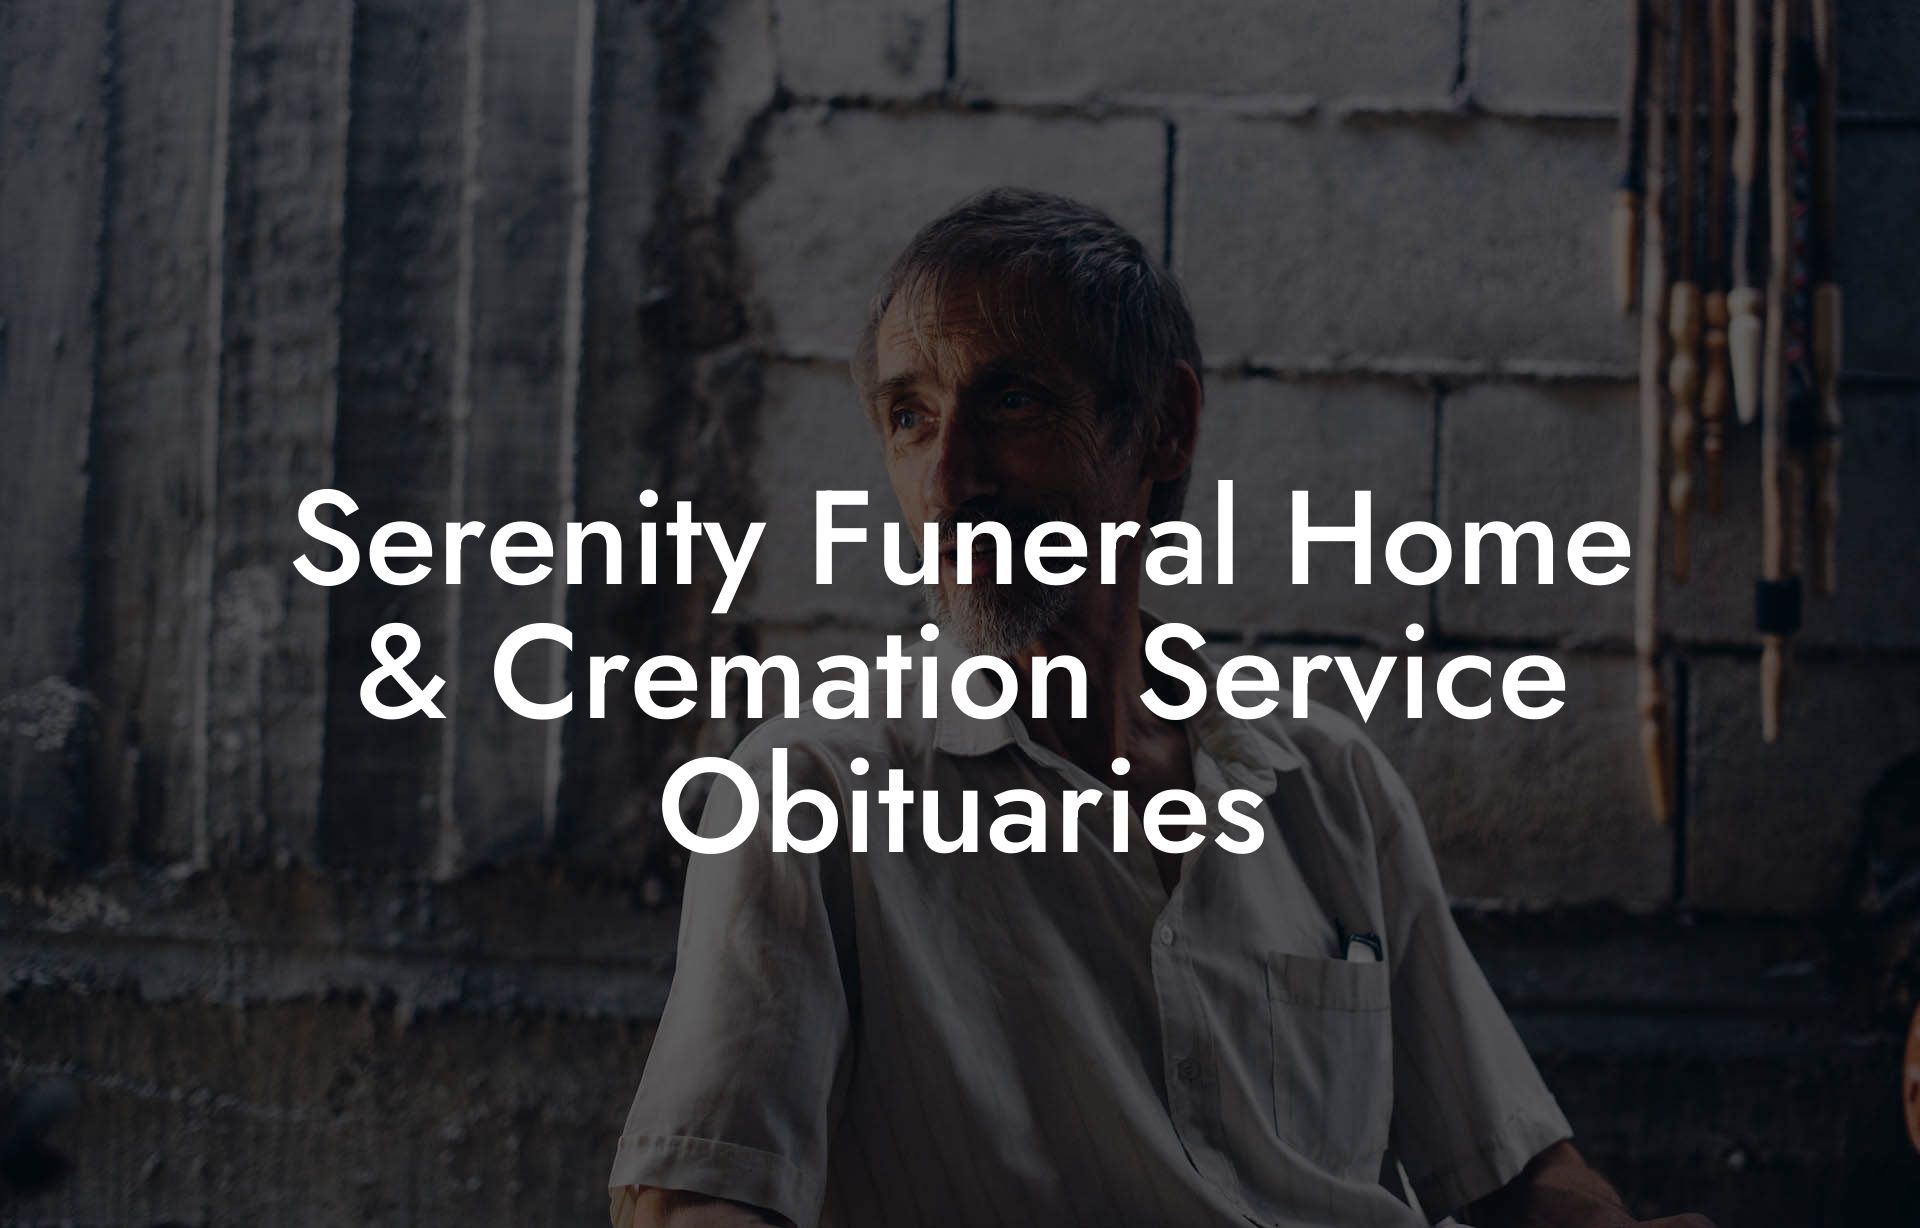 Serenity Funeral Home & Cremation Service Obituaries